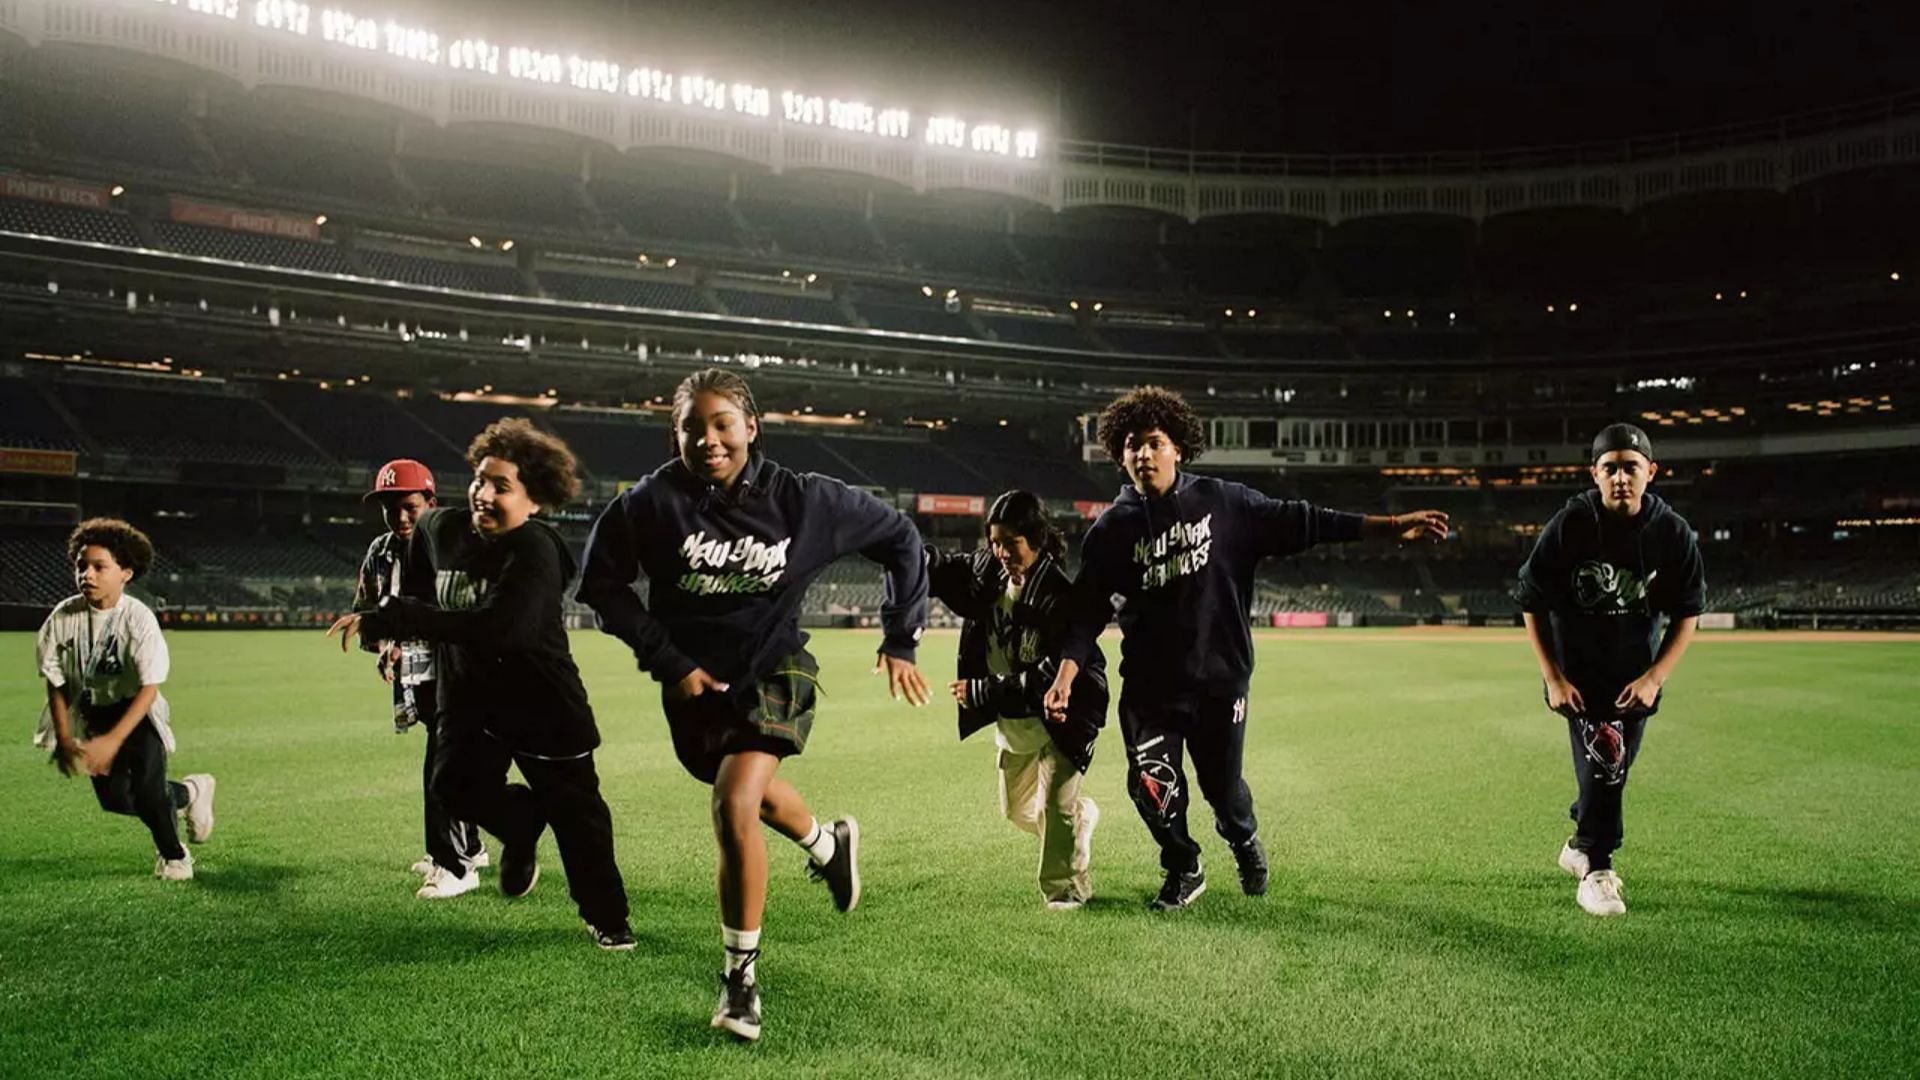 Upcoming Billionaire Boys Club x New York Yankees apparel and accessories collection (Image via BBCicecream)